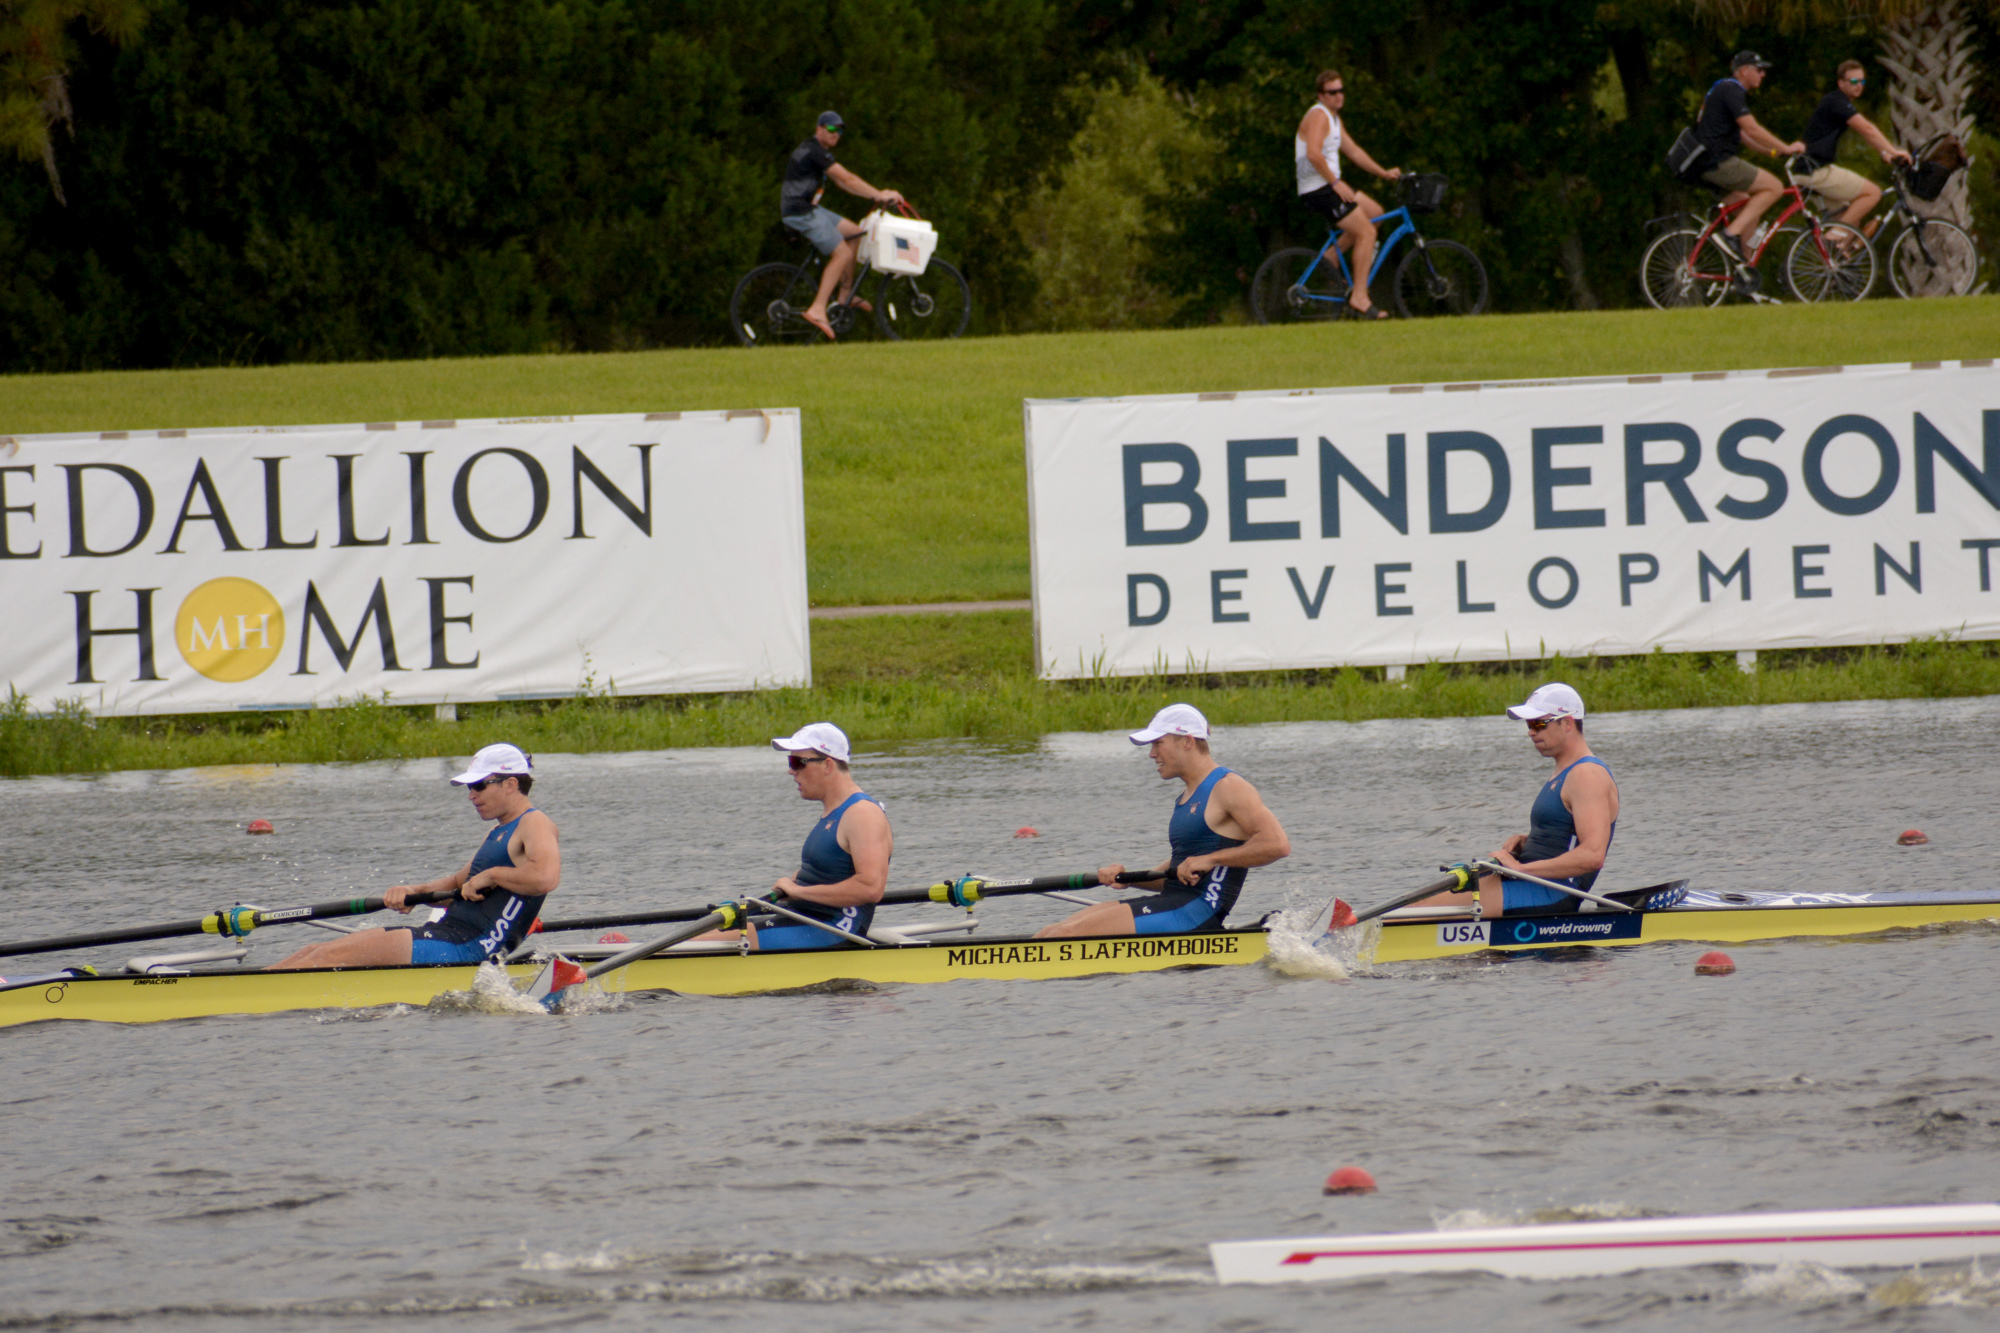 The USA's Thomas Beck, David Bridges, George Esau and Liam Corrigan finshed fifth in their heat of the men's four at the 2019 World Rowing U23 Championships. They are headed to repechage on Thursday.